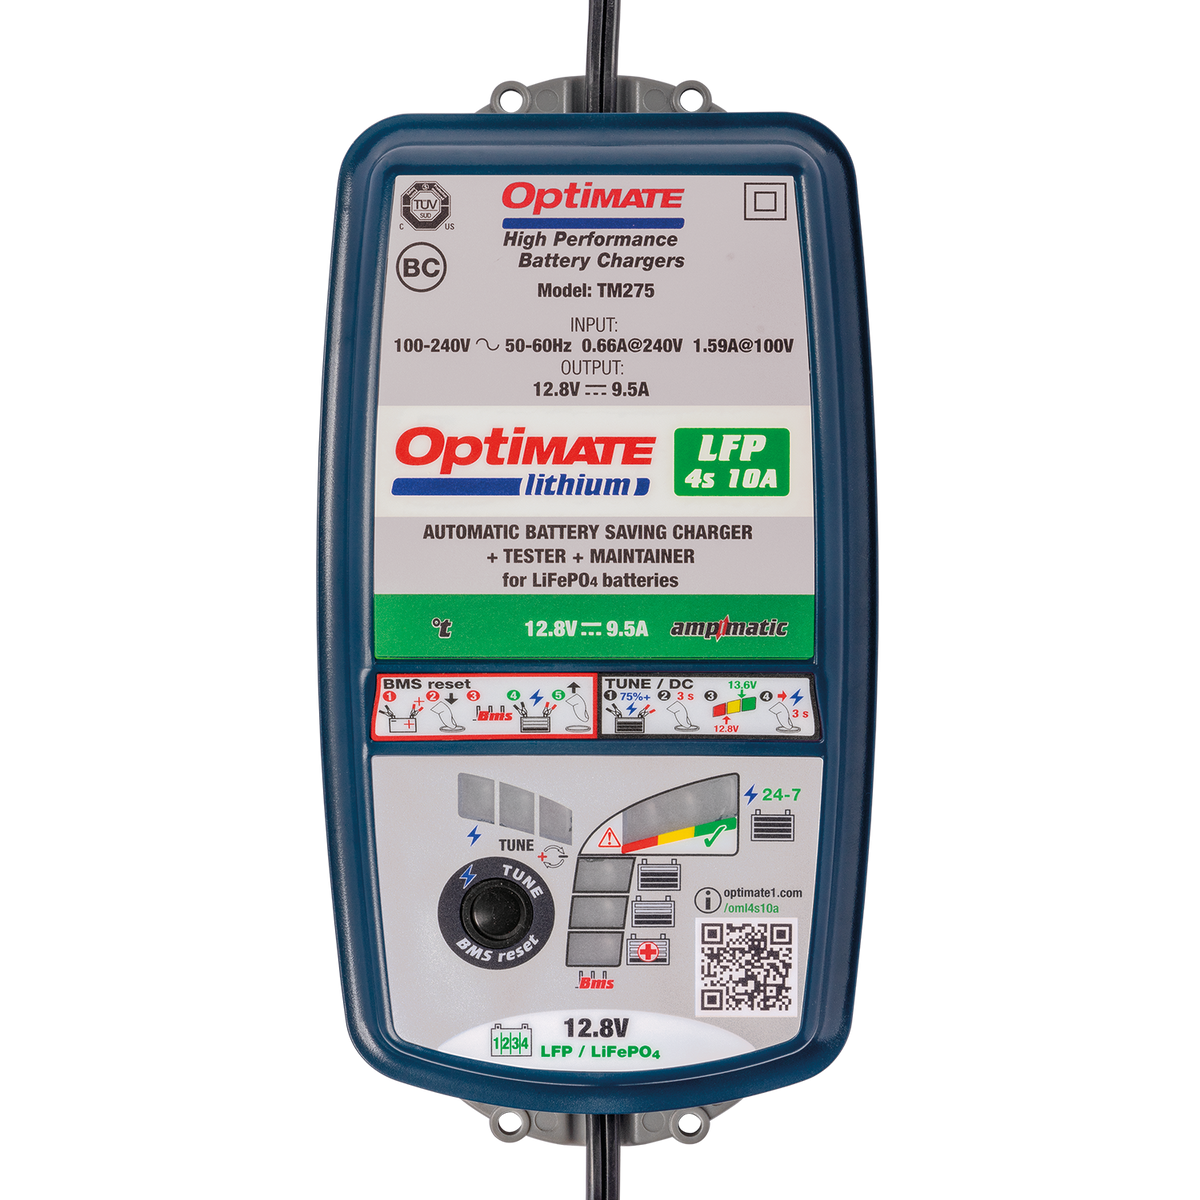 OptiMate Lithium 4s 10A Battery Charger TM-275V2